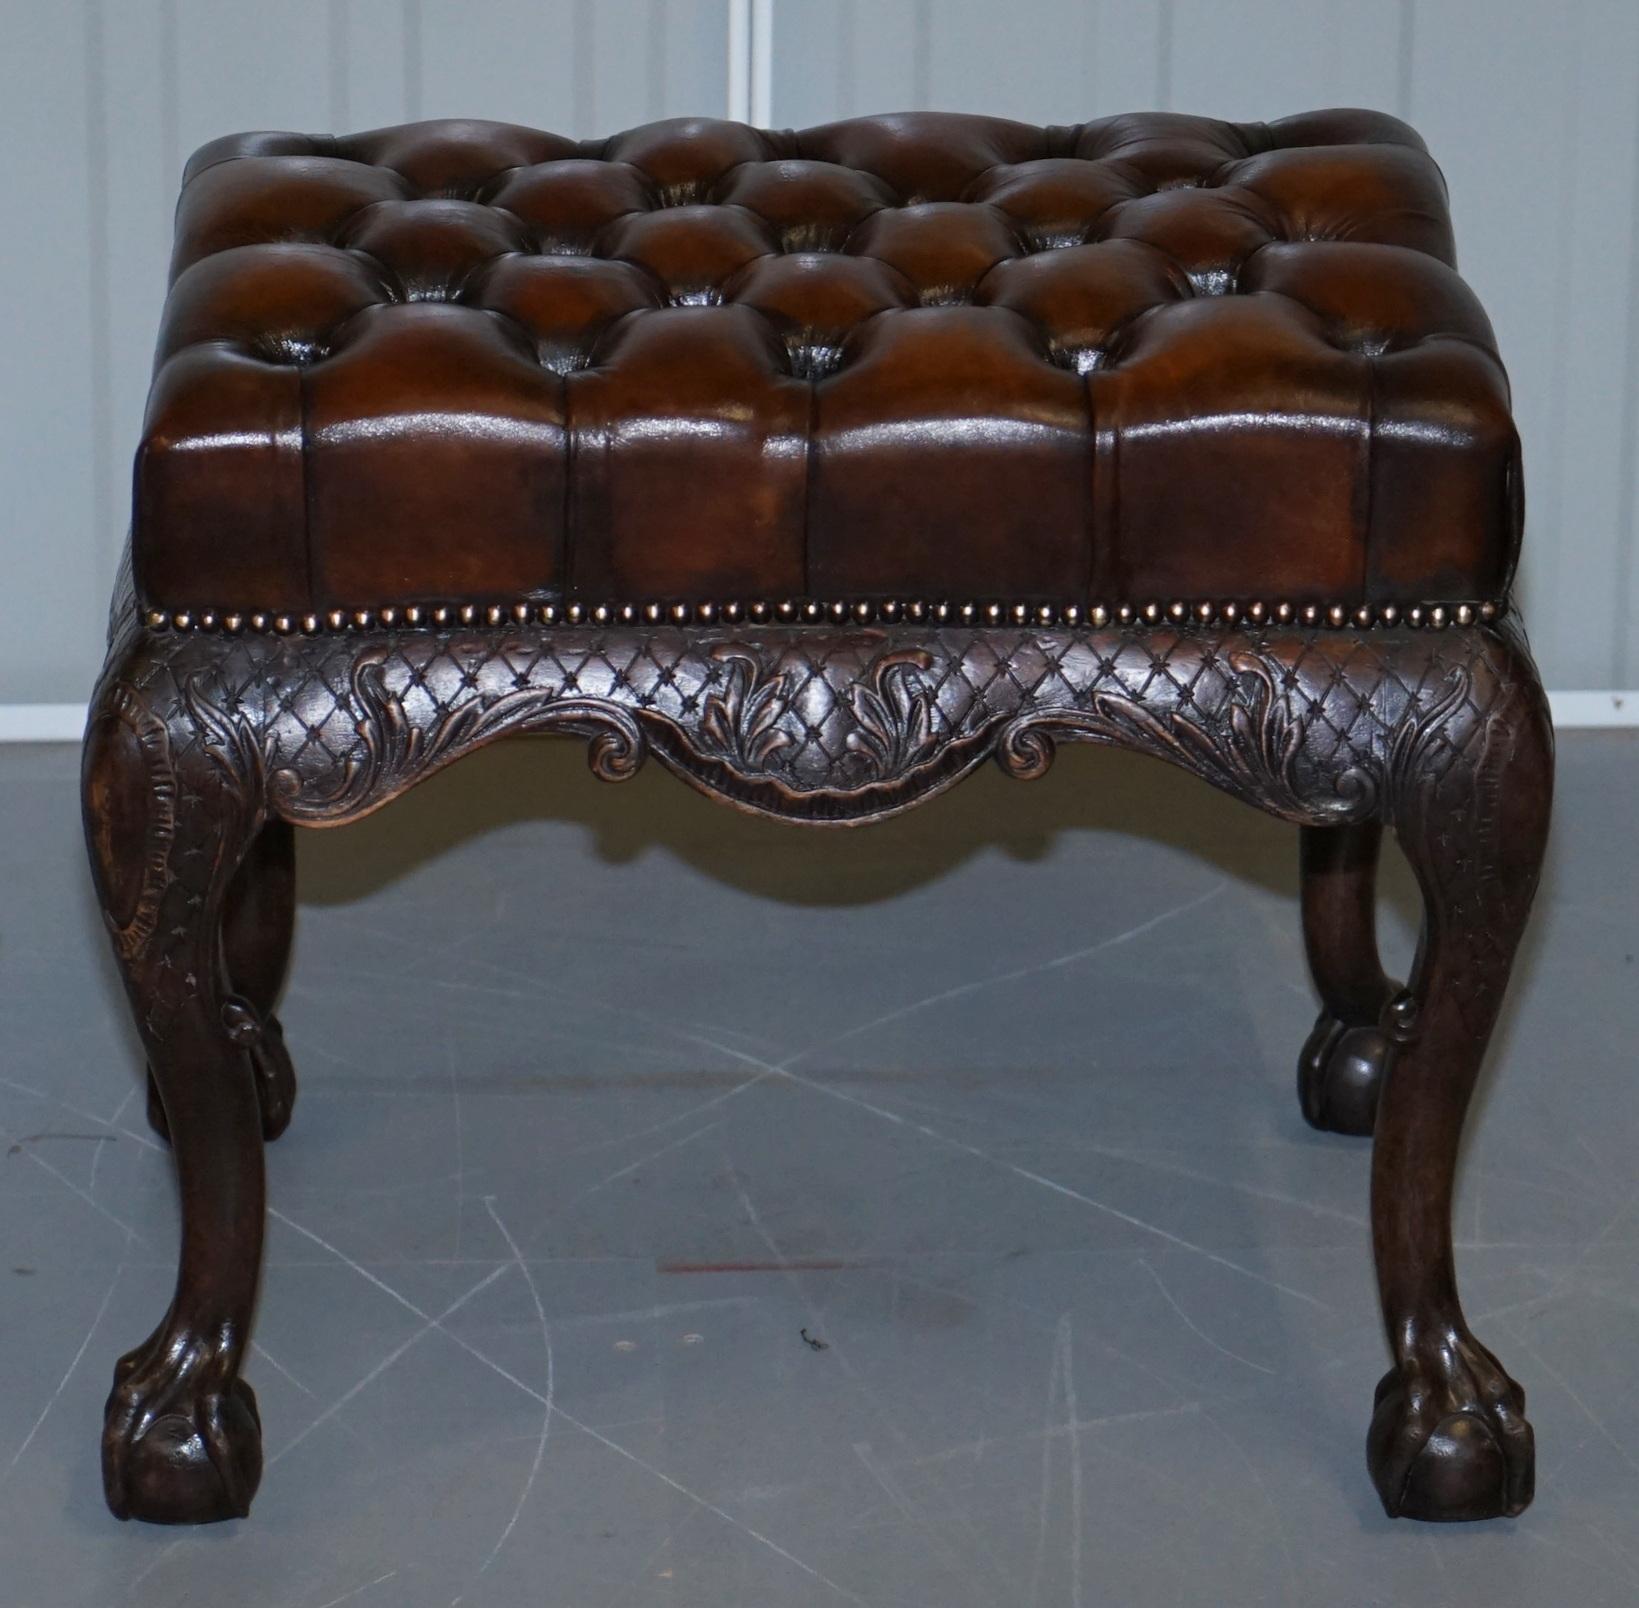 We are delighted to offer for sale this very rare original George III circa 1780 hand sawn stool, fully restored with Chesterfield cigar brown leather

A very good looking collectable and rare stool. As you can see by the pictures of the base this